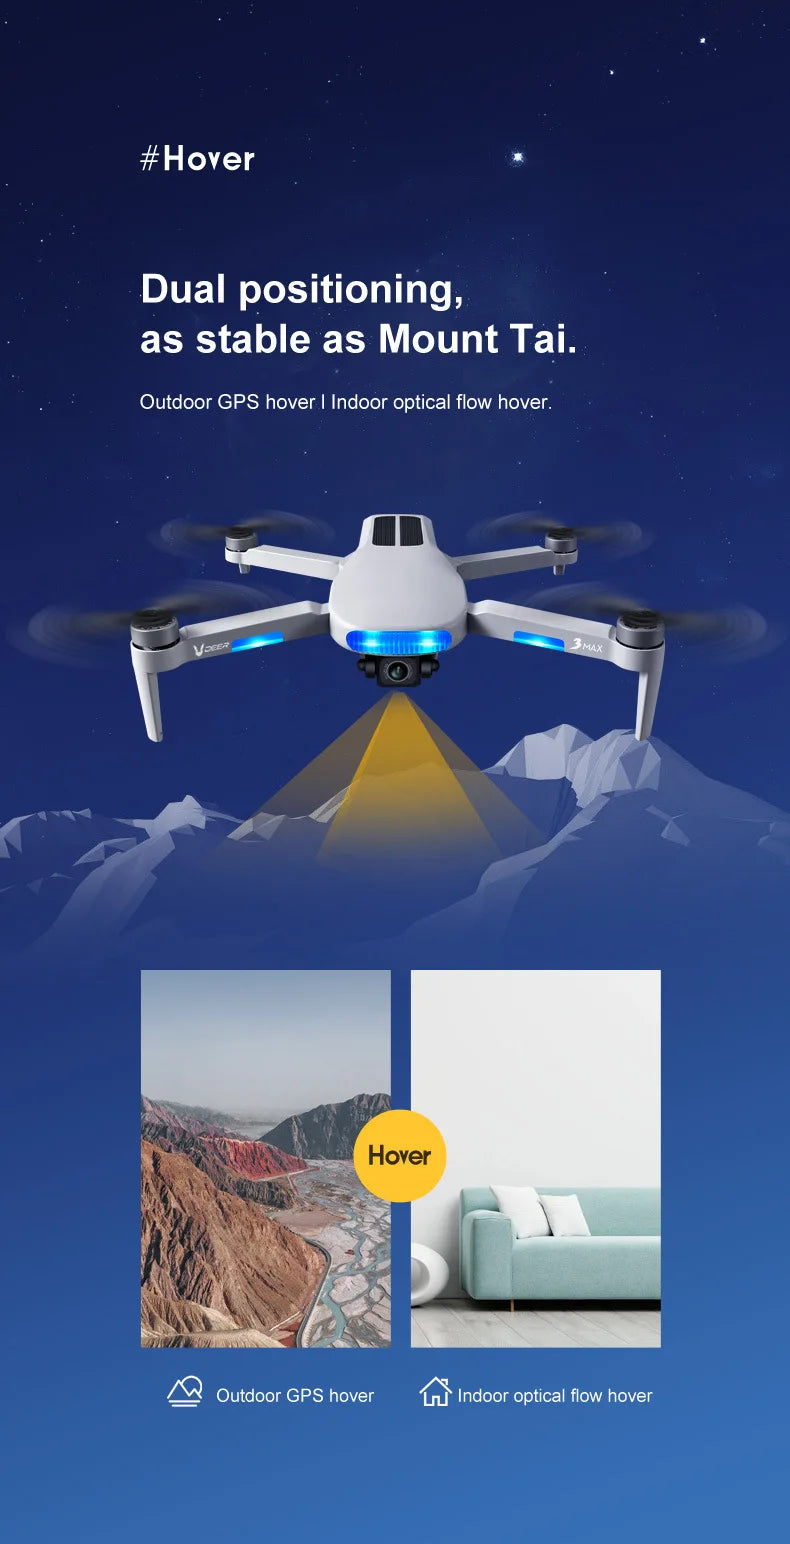 2023 New LU3 Max GPS Drone, #Hover Dual positioning; as stable as Mount Tai: Outdoor GPS